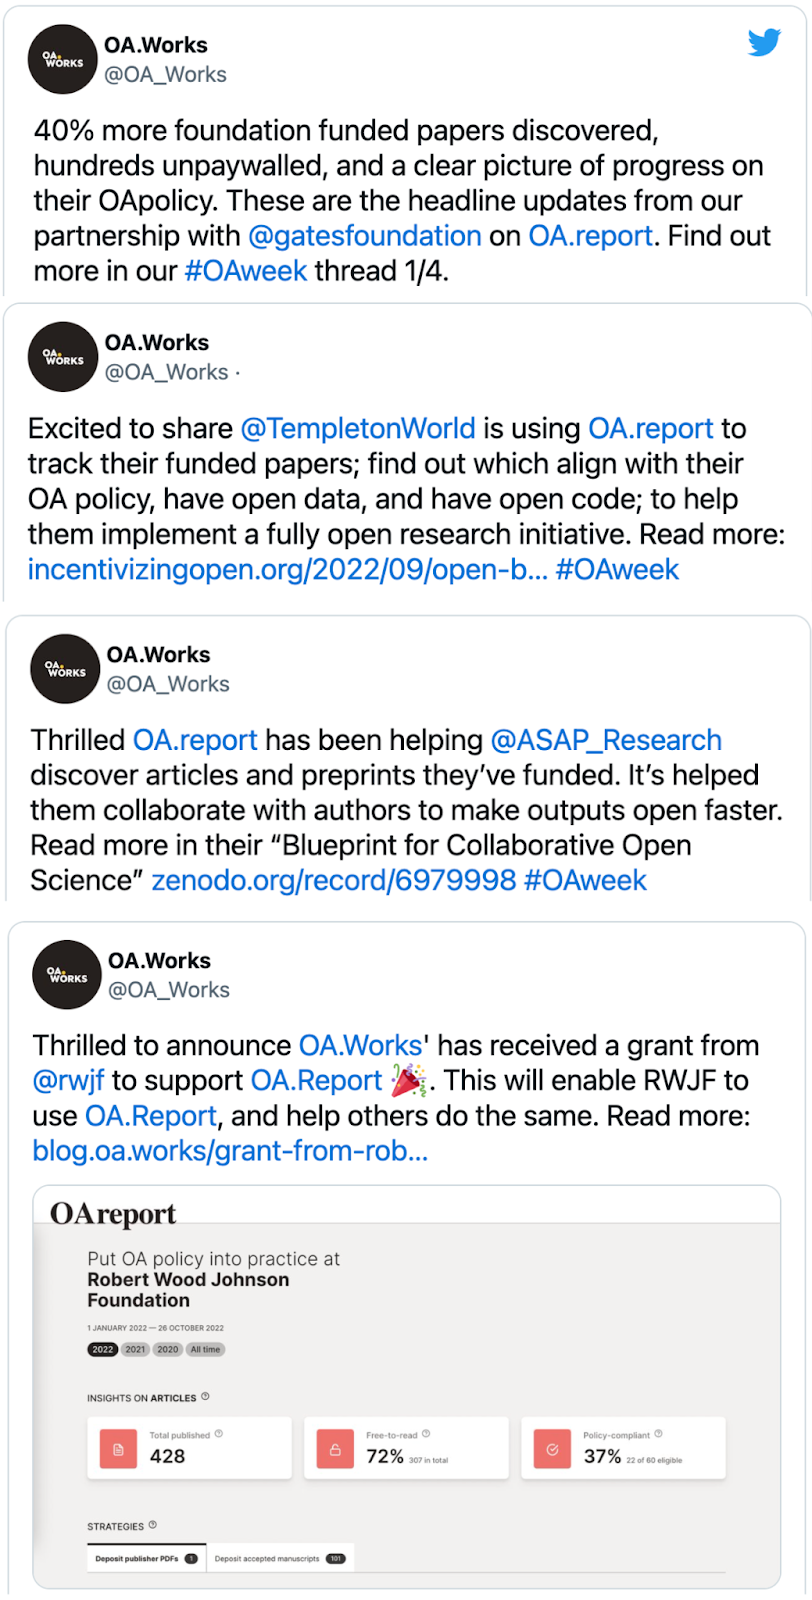 A series of tweets are stacked one on top of another. Each tweet details a way OA.Report has helped its users. The tweets read: “40% more foundation funded papers discovered, hundreds unpaywalled, and a clear picture of progress on their OA policy. These are the headline updates from our partnership with @gatesfoundation on OA.Report. Find out more in our #OAweek thread 1/4”; “Thrilled OA.Report has been helping @ASAP_Research discover articles and preprints they’ve funded. It’s helped them collaborate with authors to make outputs open faster. Read more in their ‘Blueprint for Collaborative Open Science’ zenodo.org/record/6979998 #OAweek”; “Excited to share @TempletonWorld is using OA.Report to track their funded papers; find out which align with their OA policy, have open data, and have open code; to help them implement a fully open research initiative. #OAweek”; “Thrilled to announce OA.Works has received a grant from @RWJF to support OA.Report 🎉. This will enable RWJF to use OA.Report, and help others do the same.”